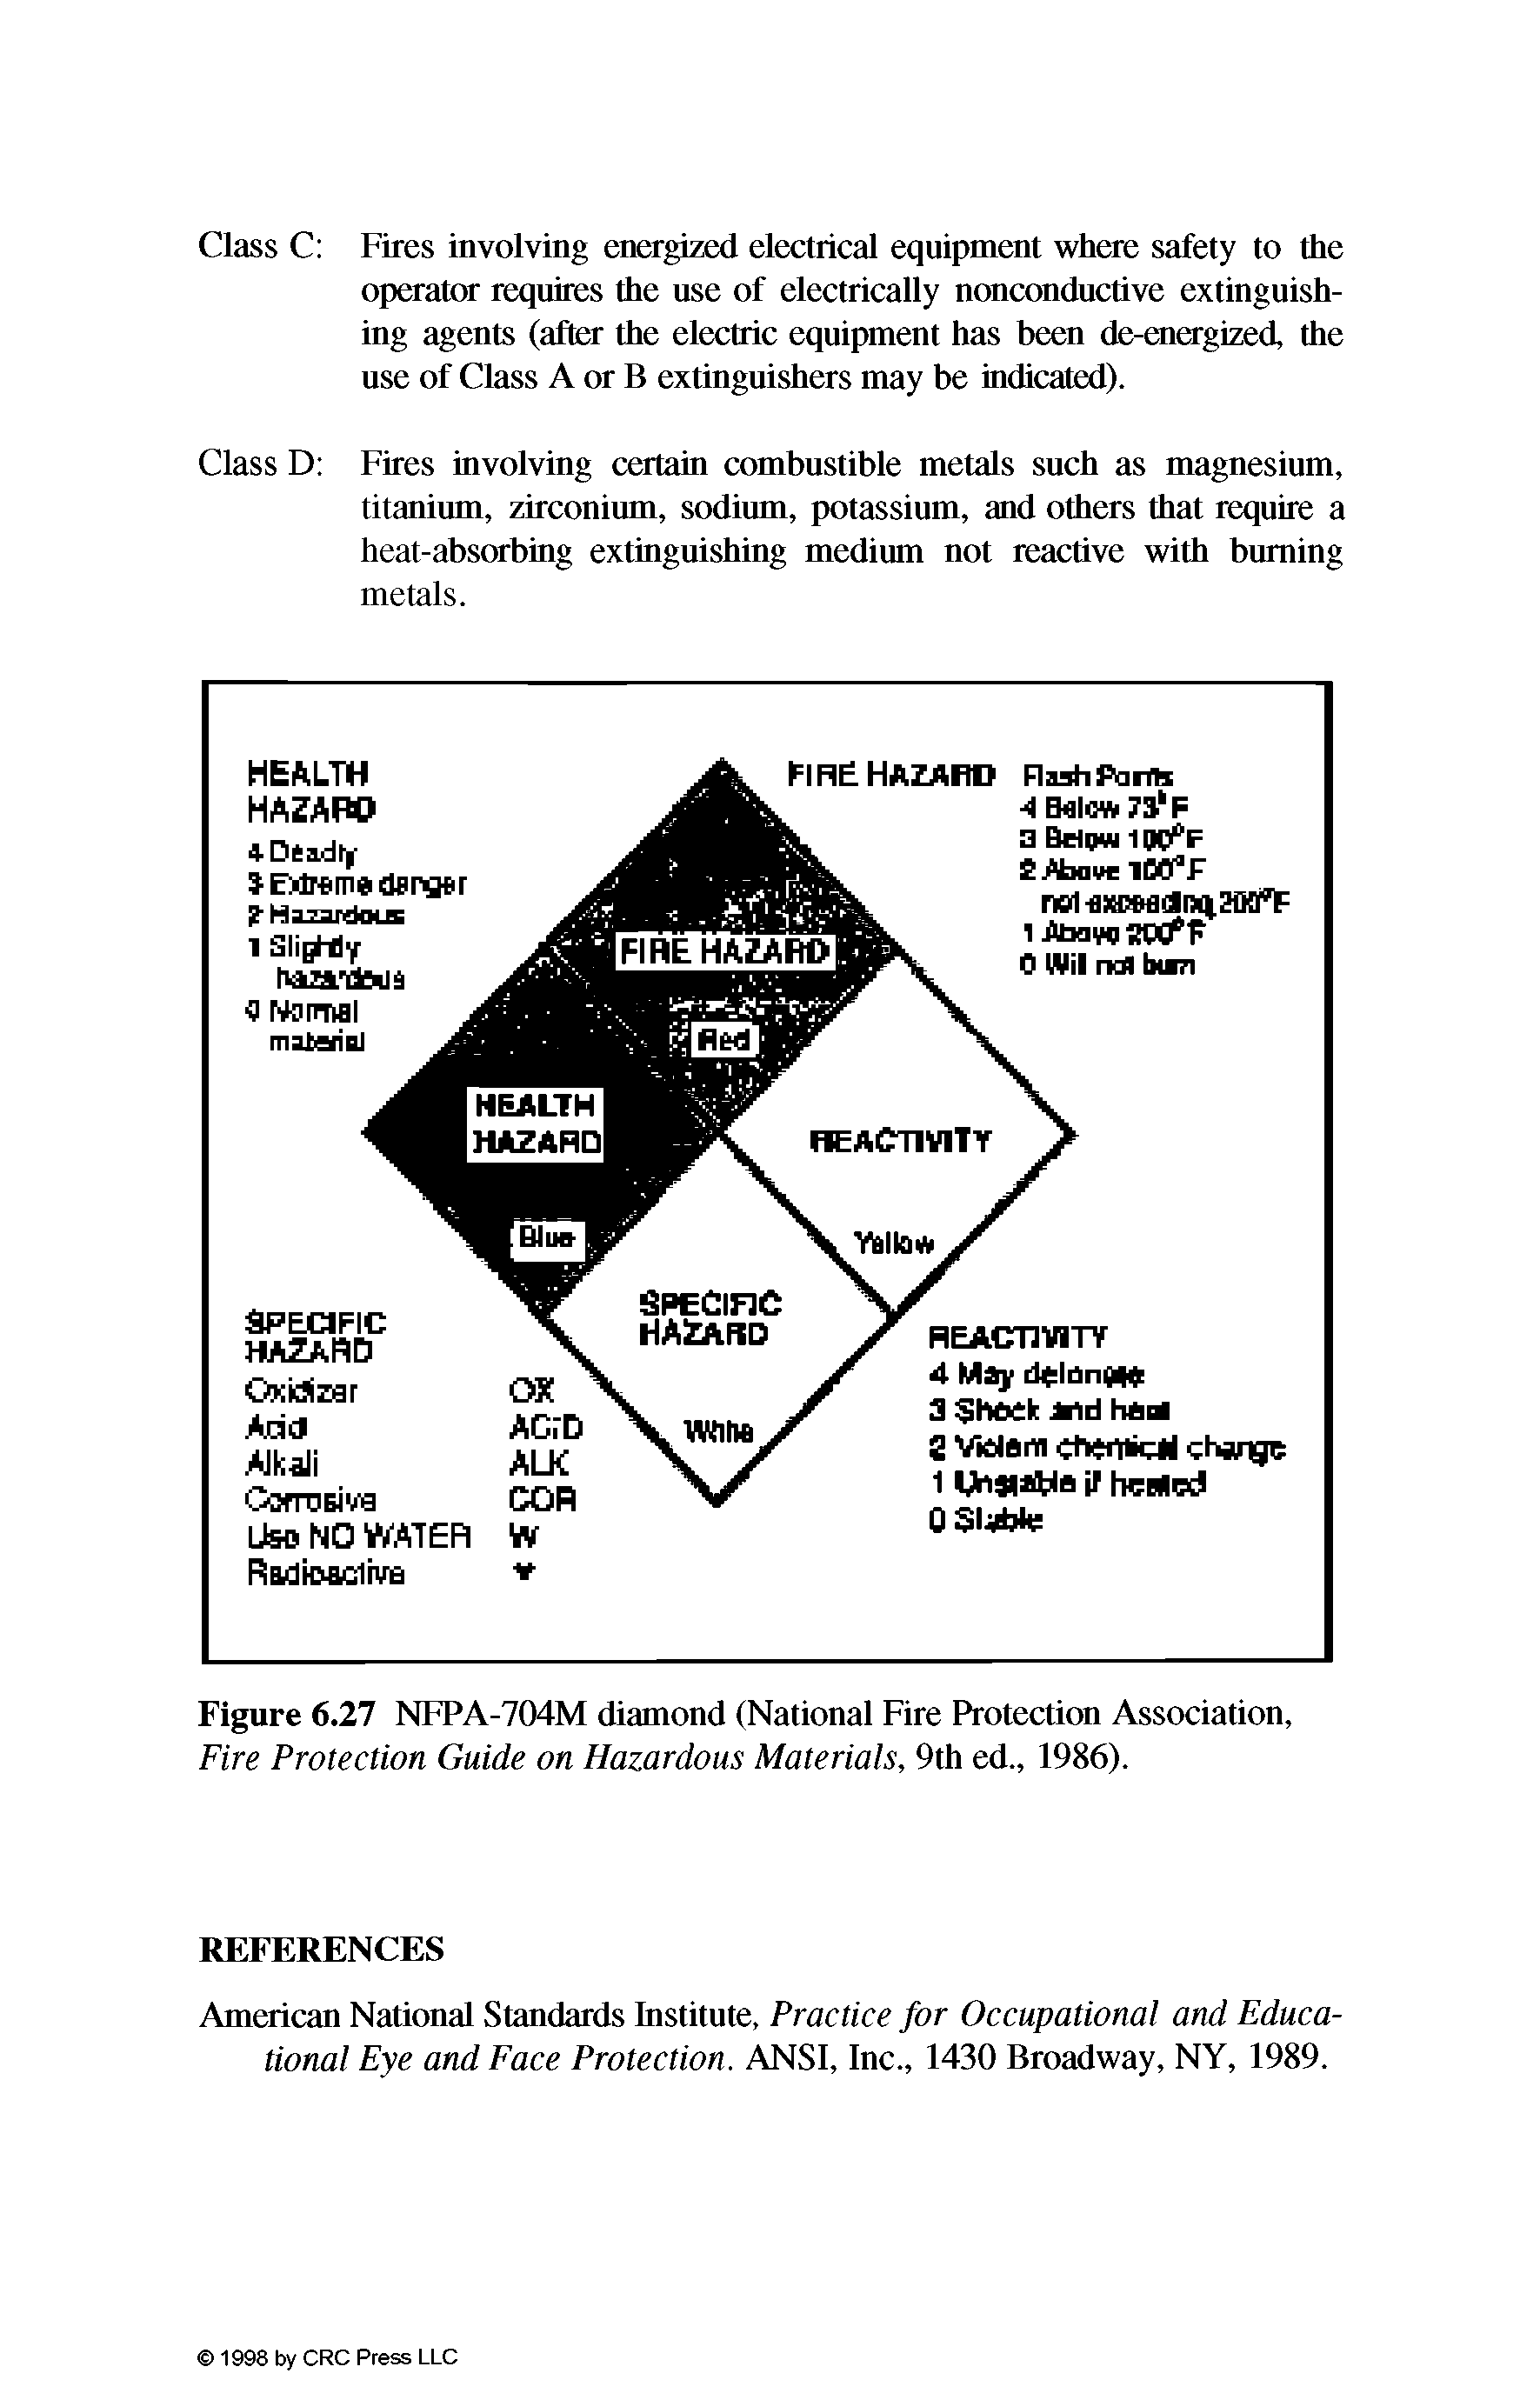 Figure 6.27 NFPA-704M diamond (National Fire Protection Association, Fire Protection Guide on Hazardous Materials, 9th ed., 1986).